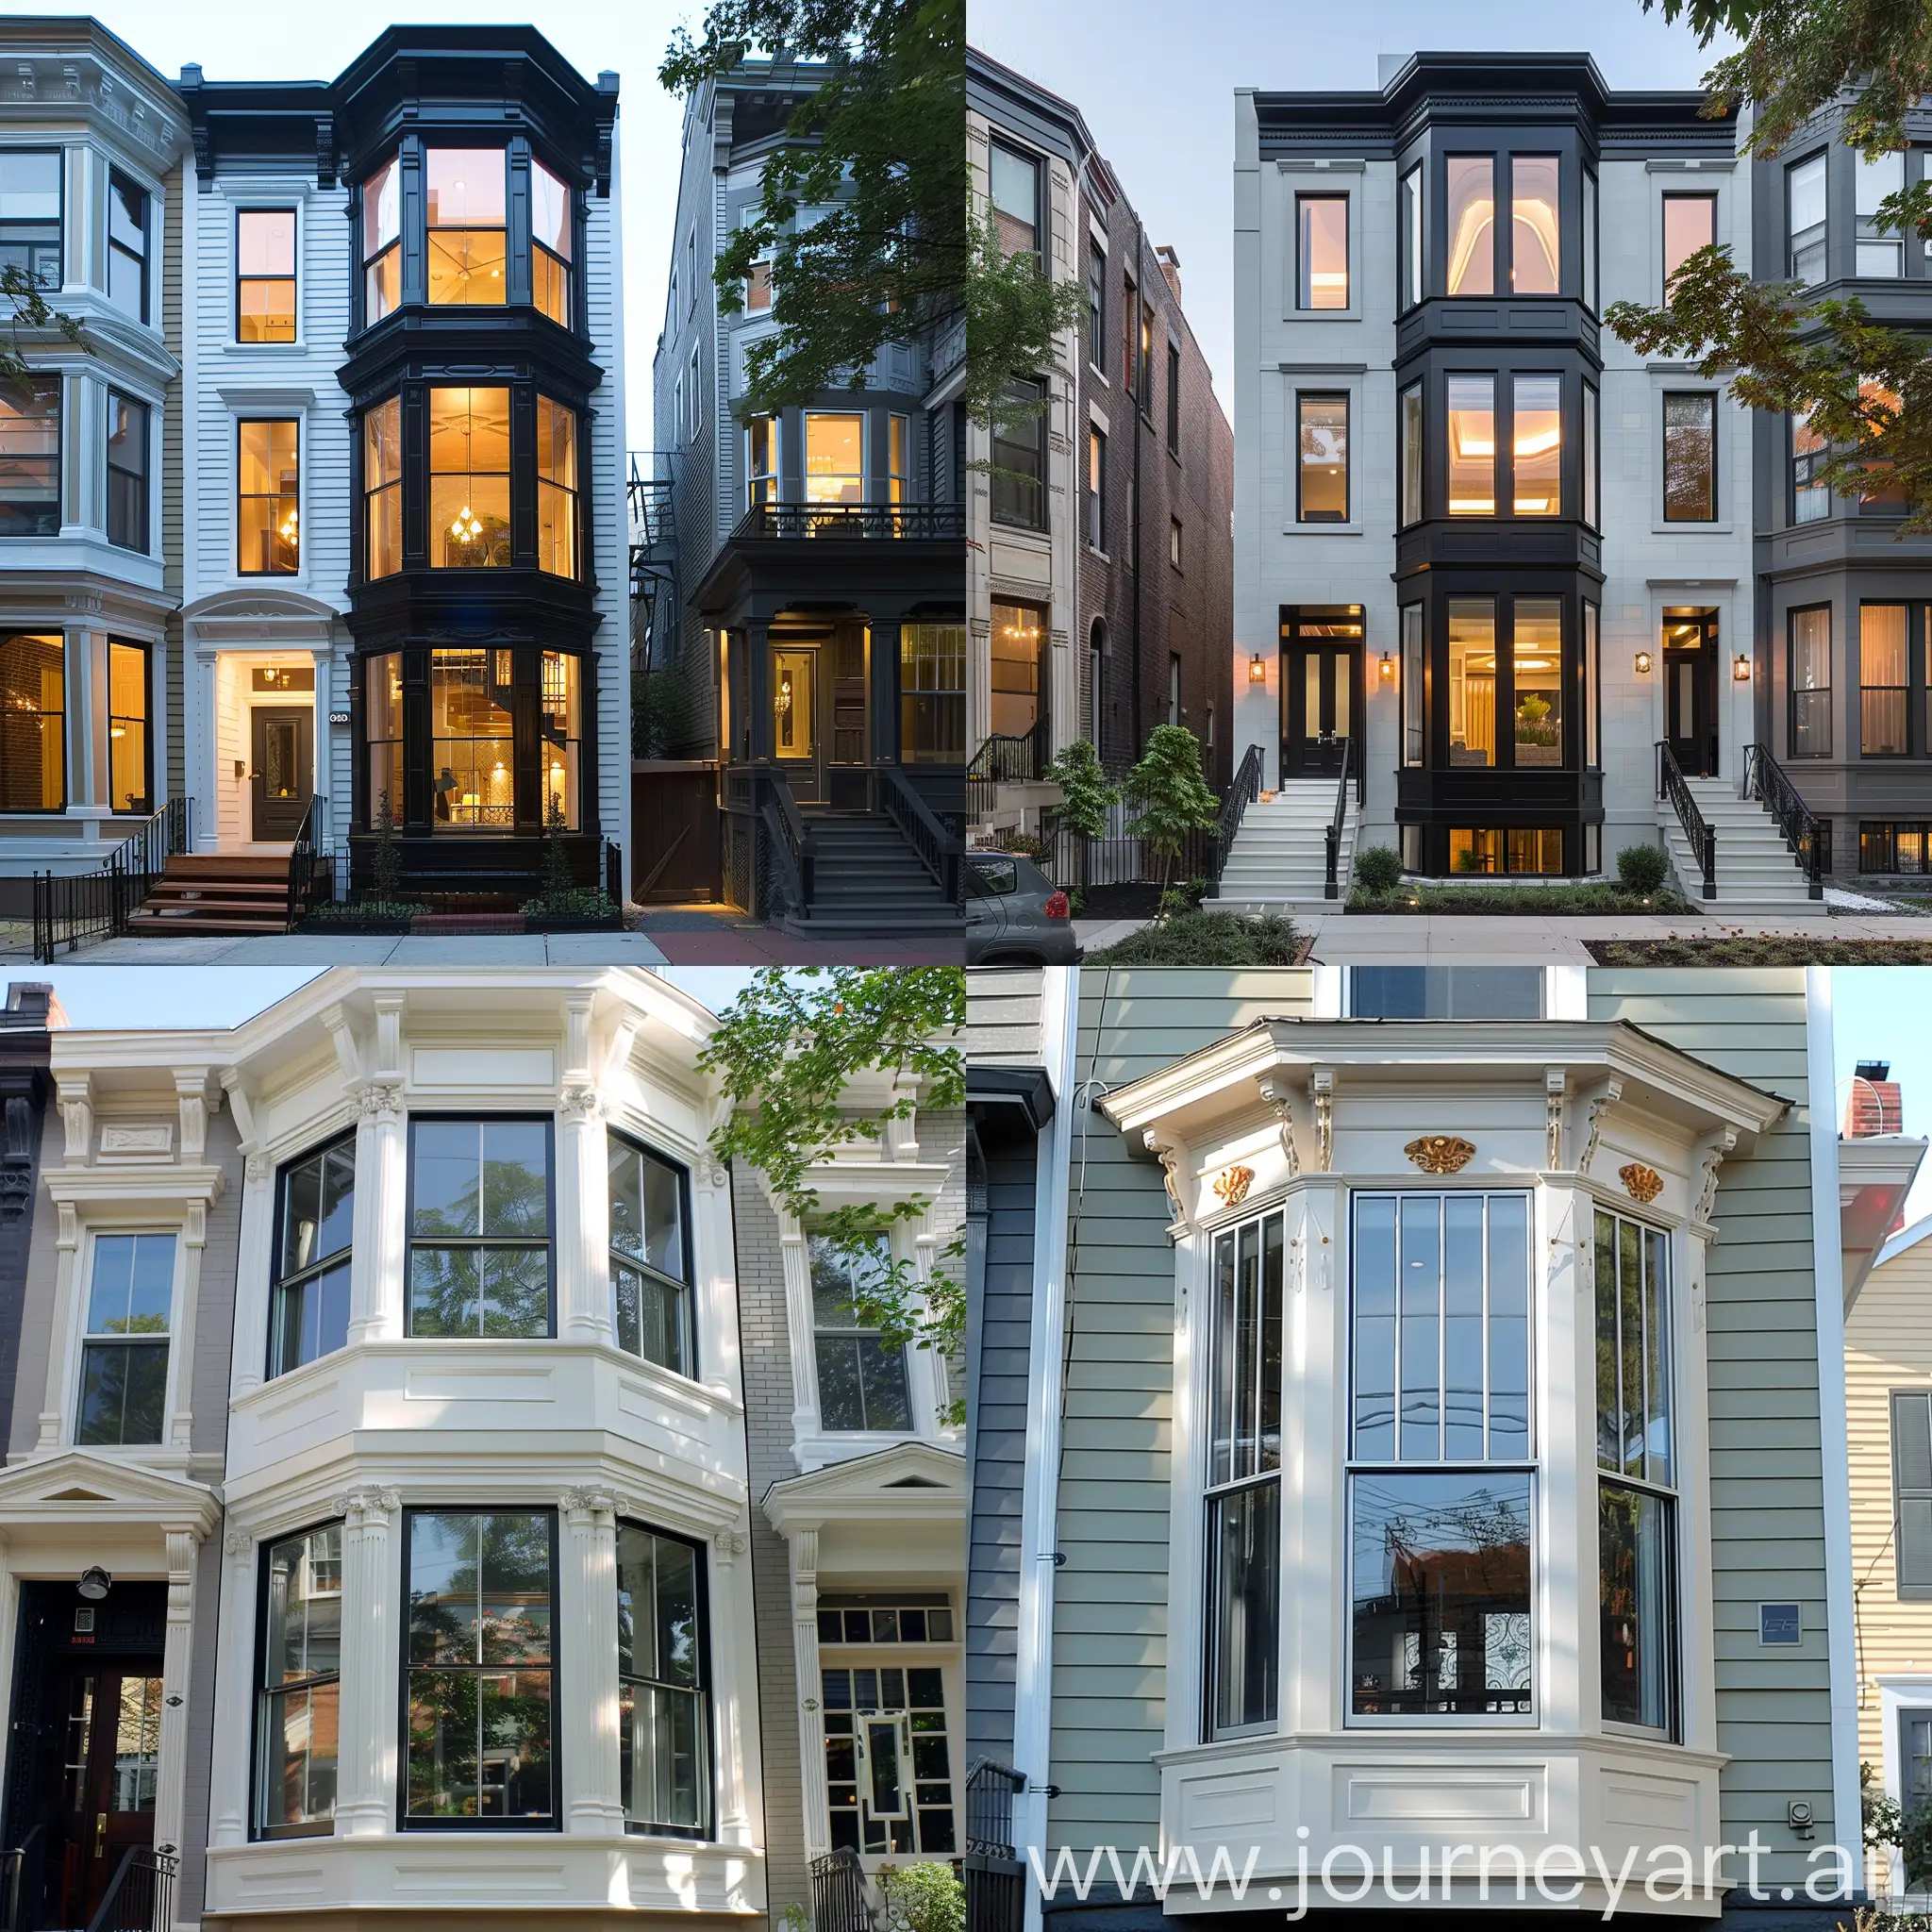 Charming-Bay-Window-Design-in-a-FiveStory-Building-in-New-Jersey